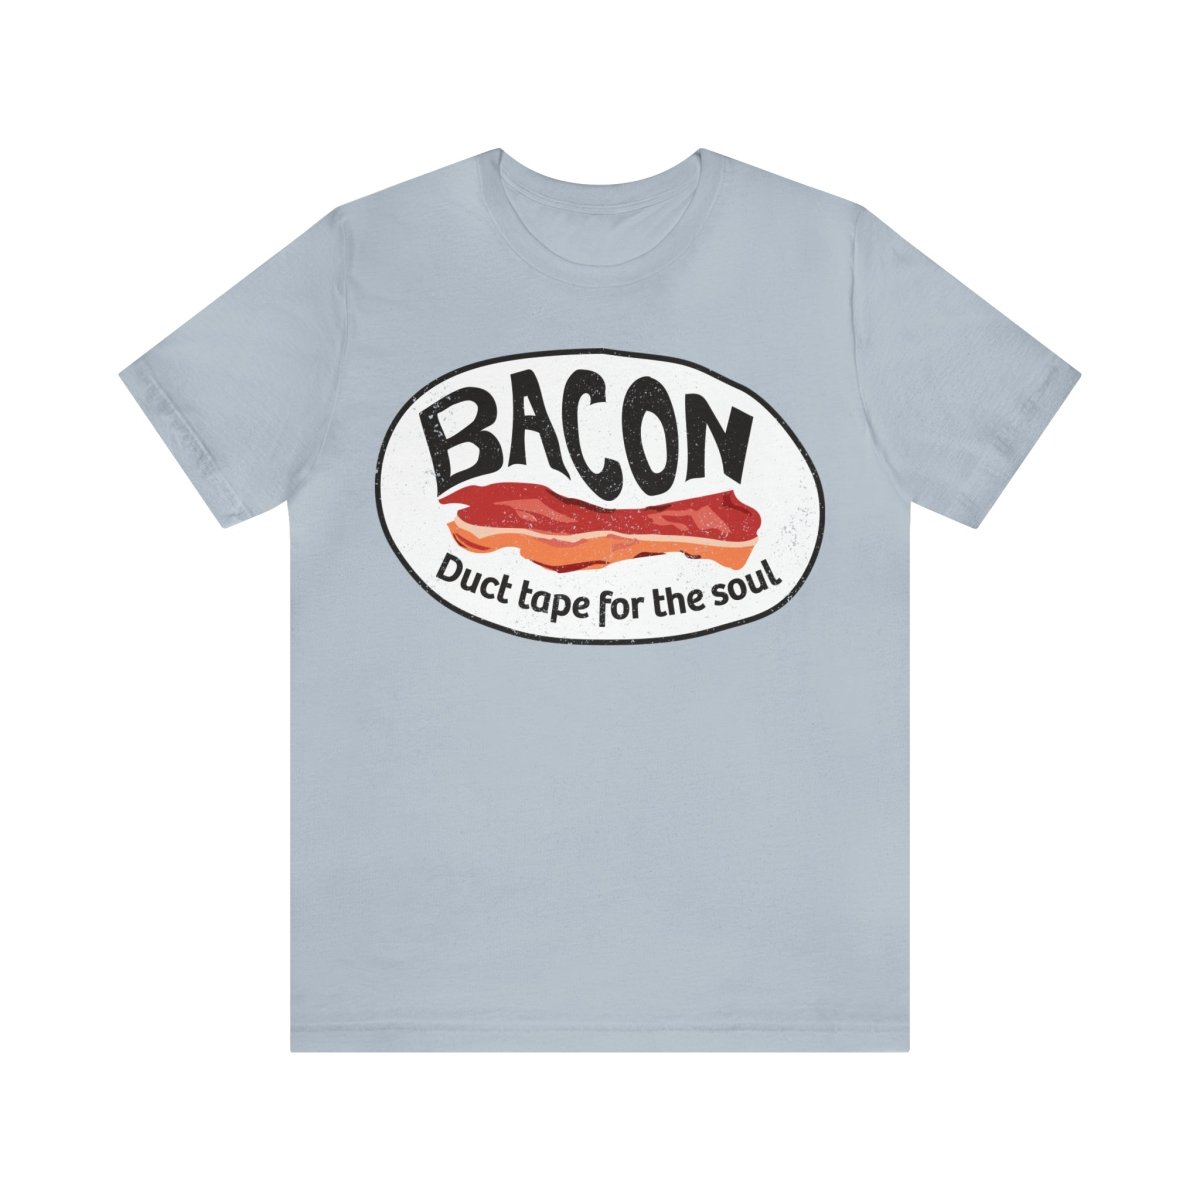 Bacon, Duct Tape for the Soul Premium T-Shirt, Extra Sizzle